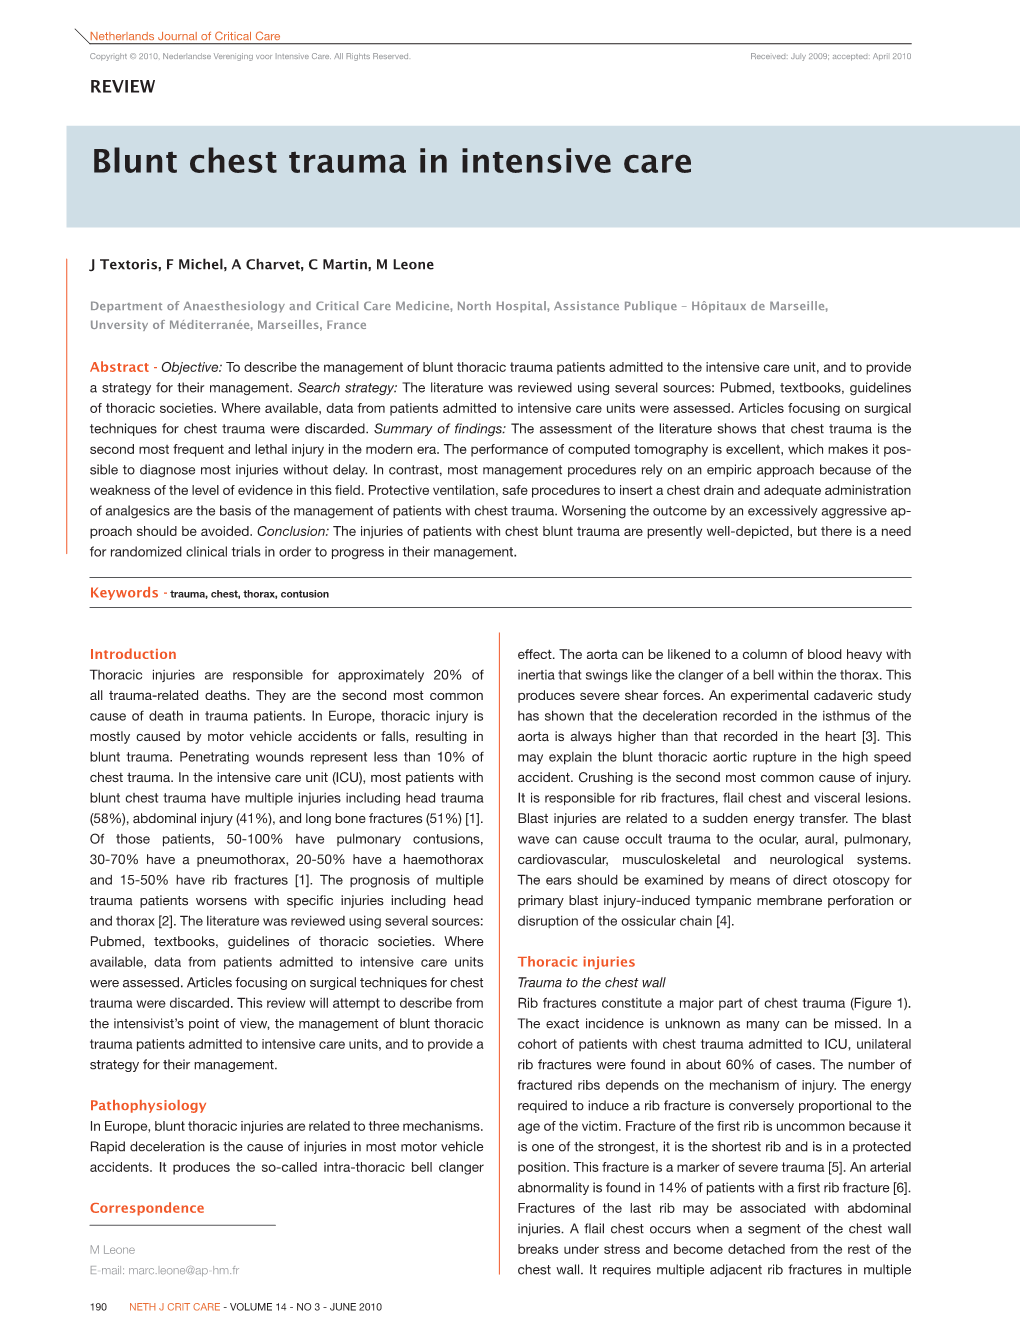 2010 NVIC NJCC 03 V2.Indd 190 25-05-10 12:39 Netherlands Journal of Critical Care Blunt Chest Trauma in Intensive Care